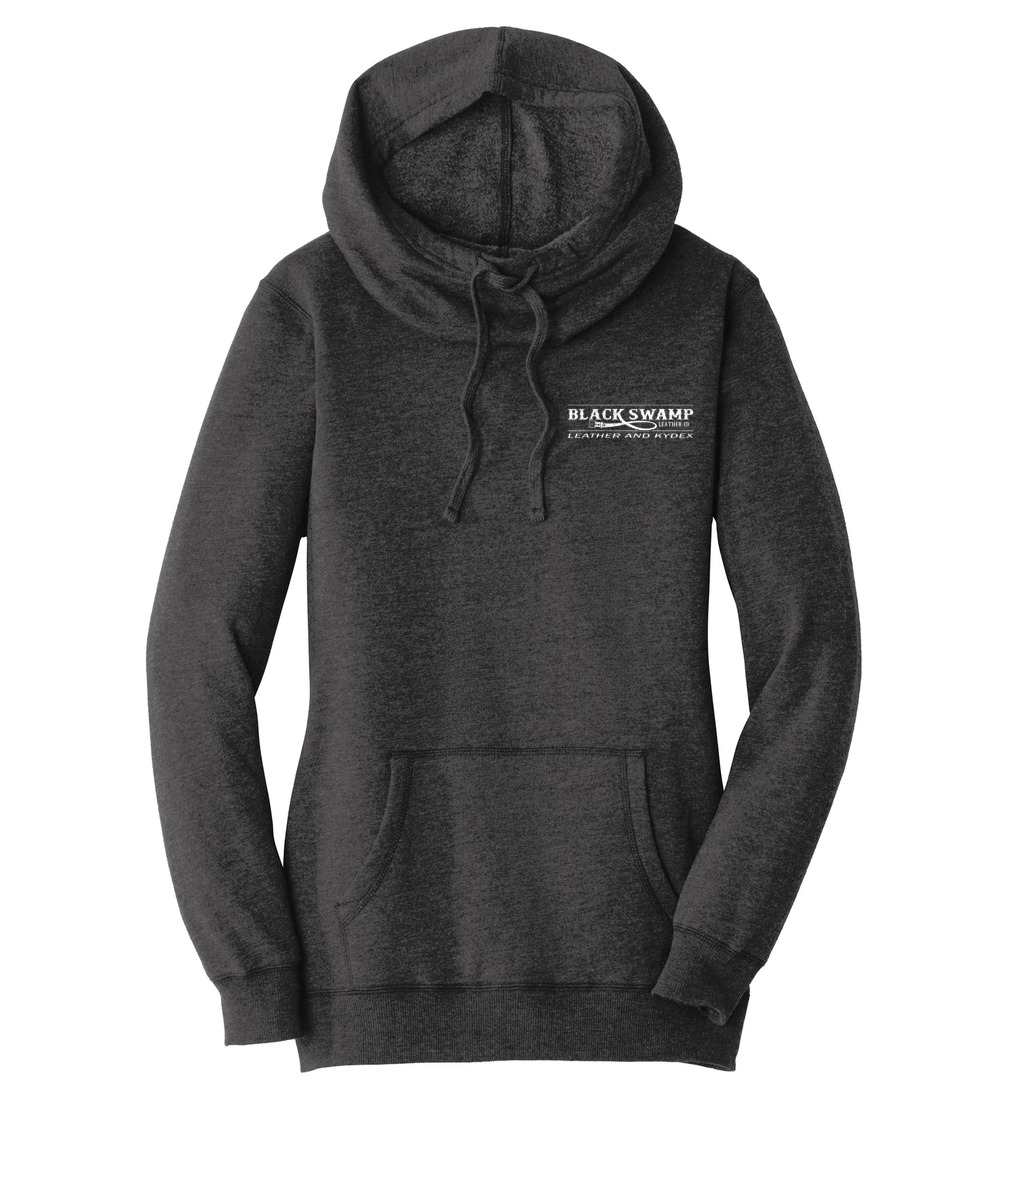 District ® Women’s Lightweight Fleece Hoodie Embroidered with white thread - Black Swamp Leather Company